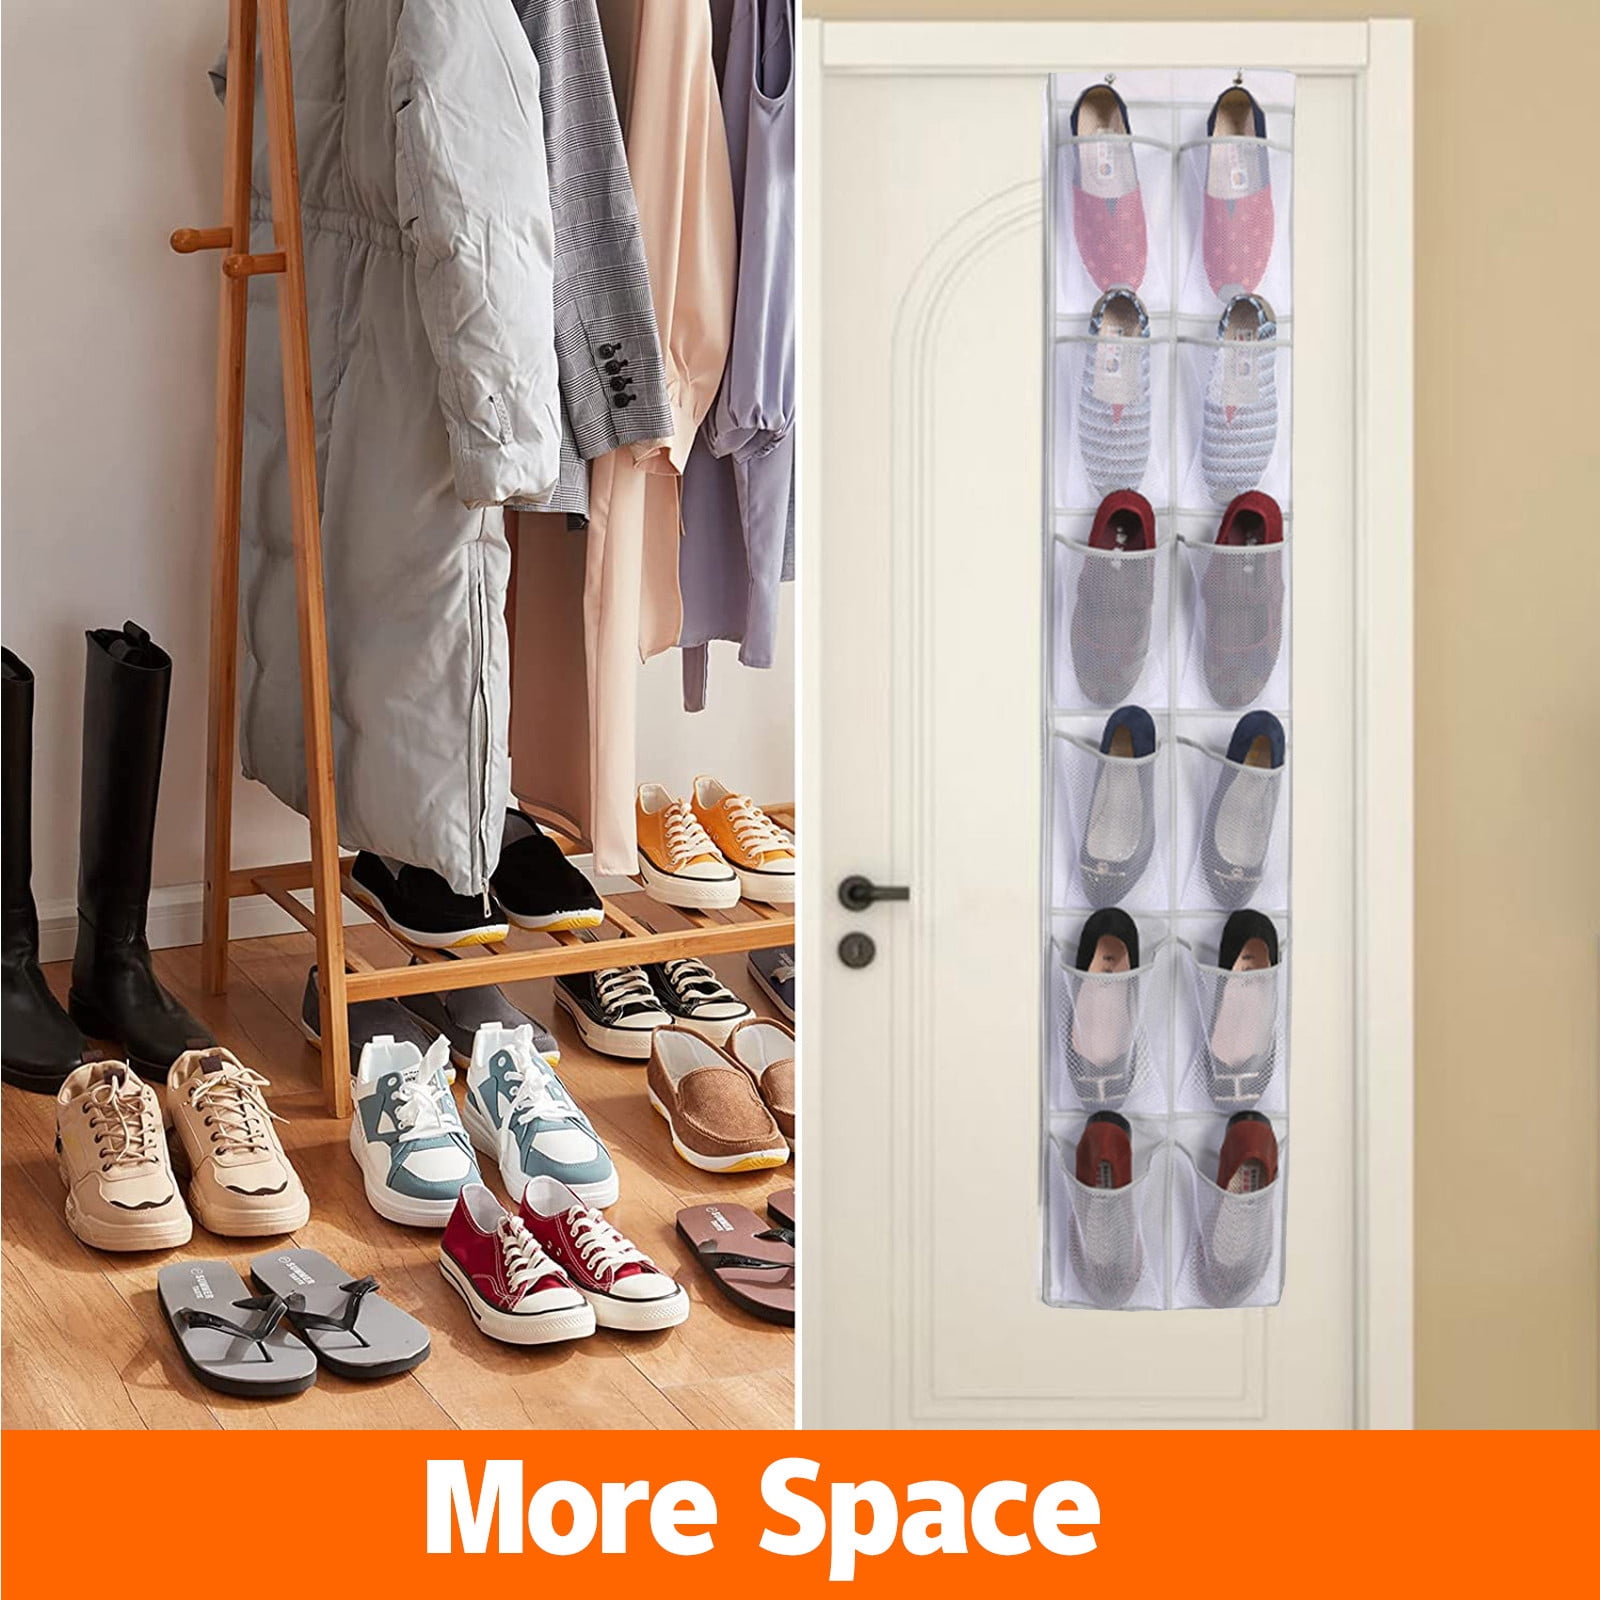 New Uses For a Hanging Door Shoe Organizer - Home Storage Hacks